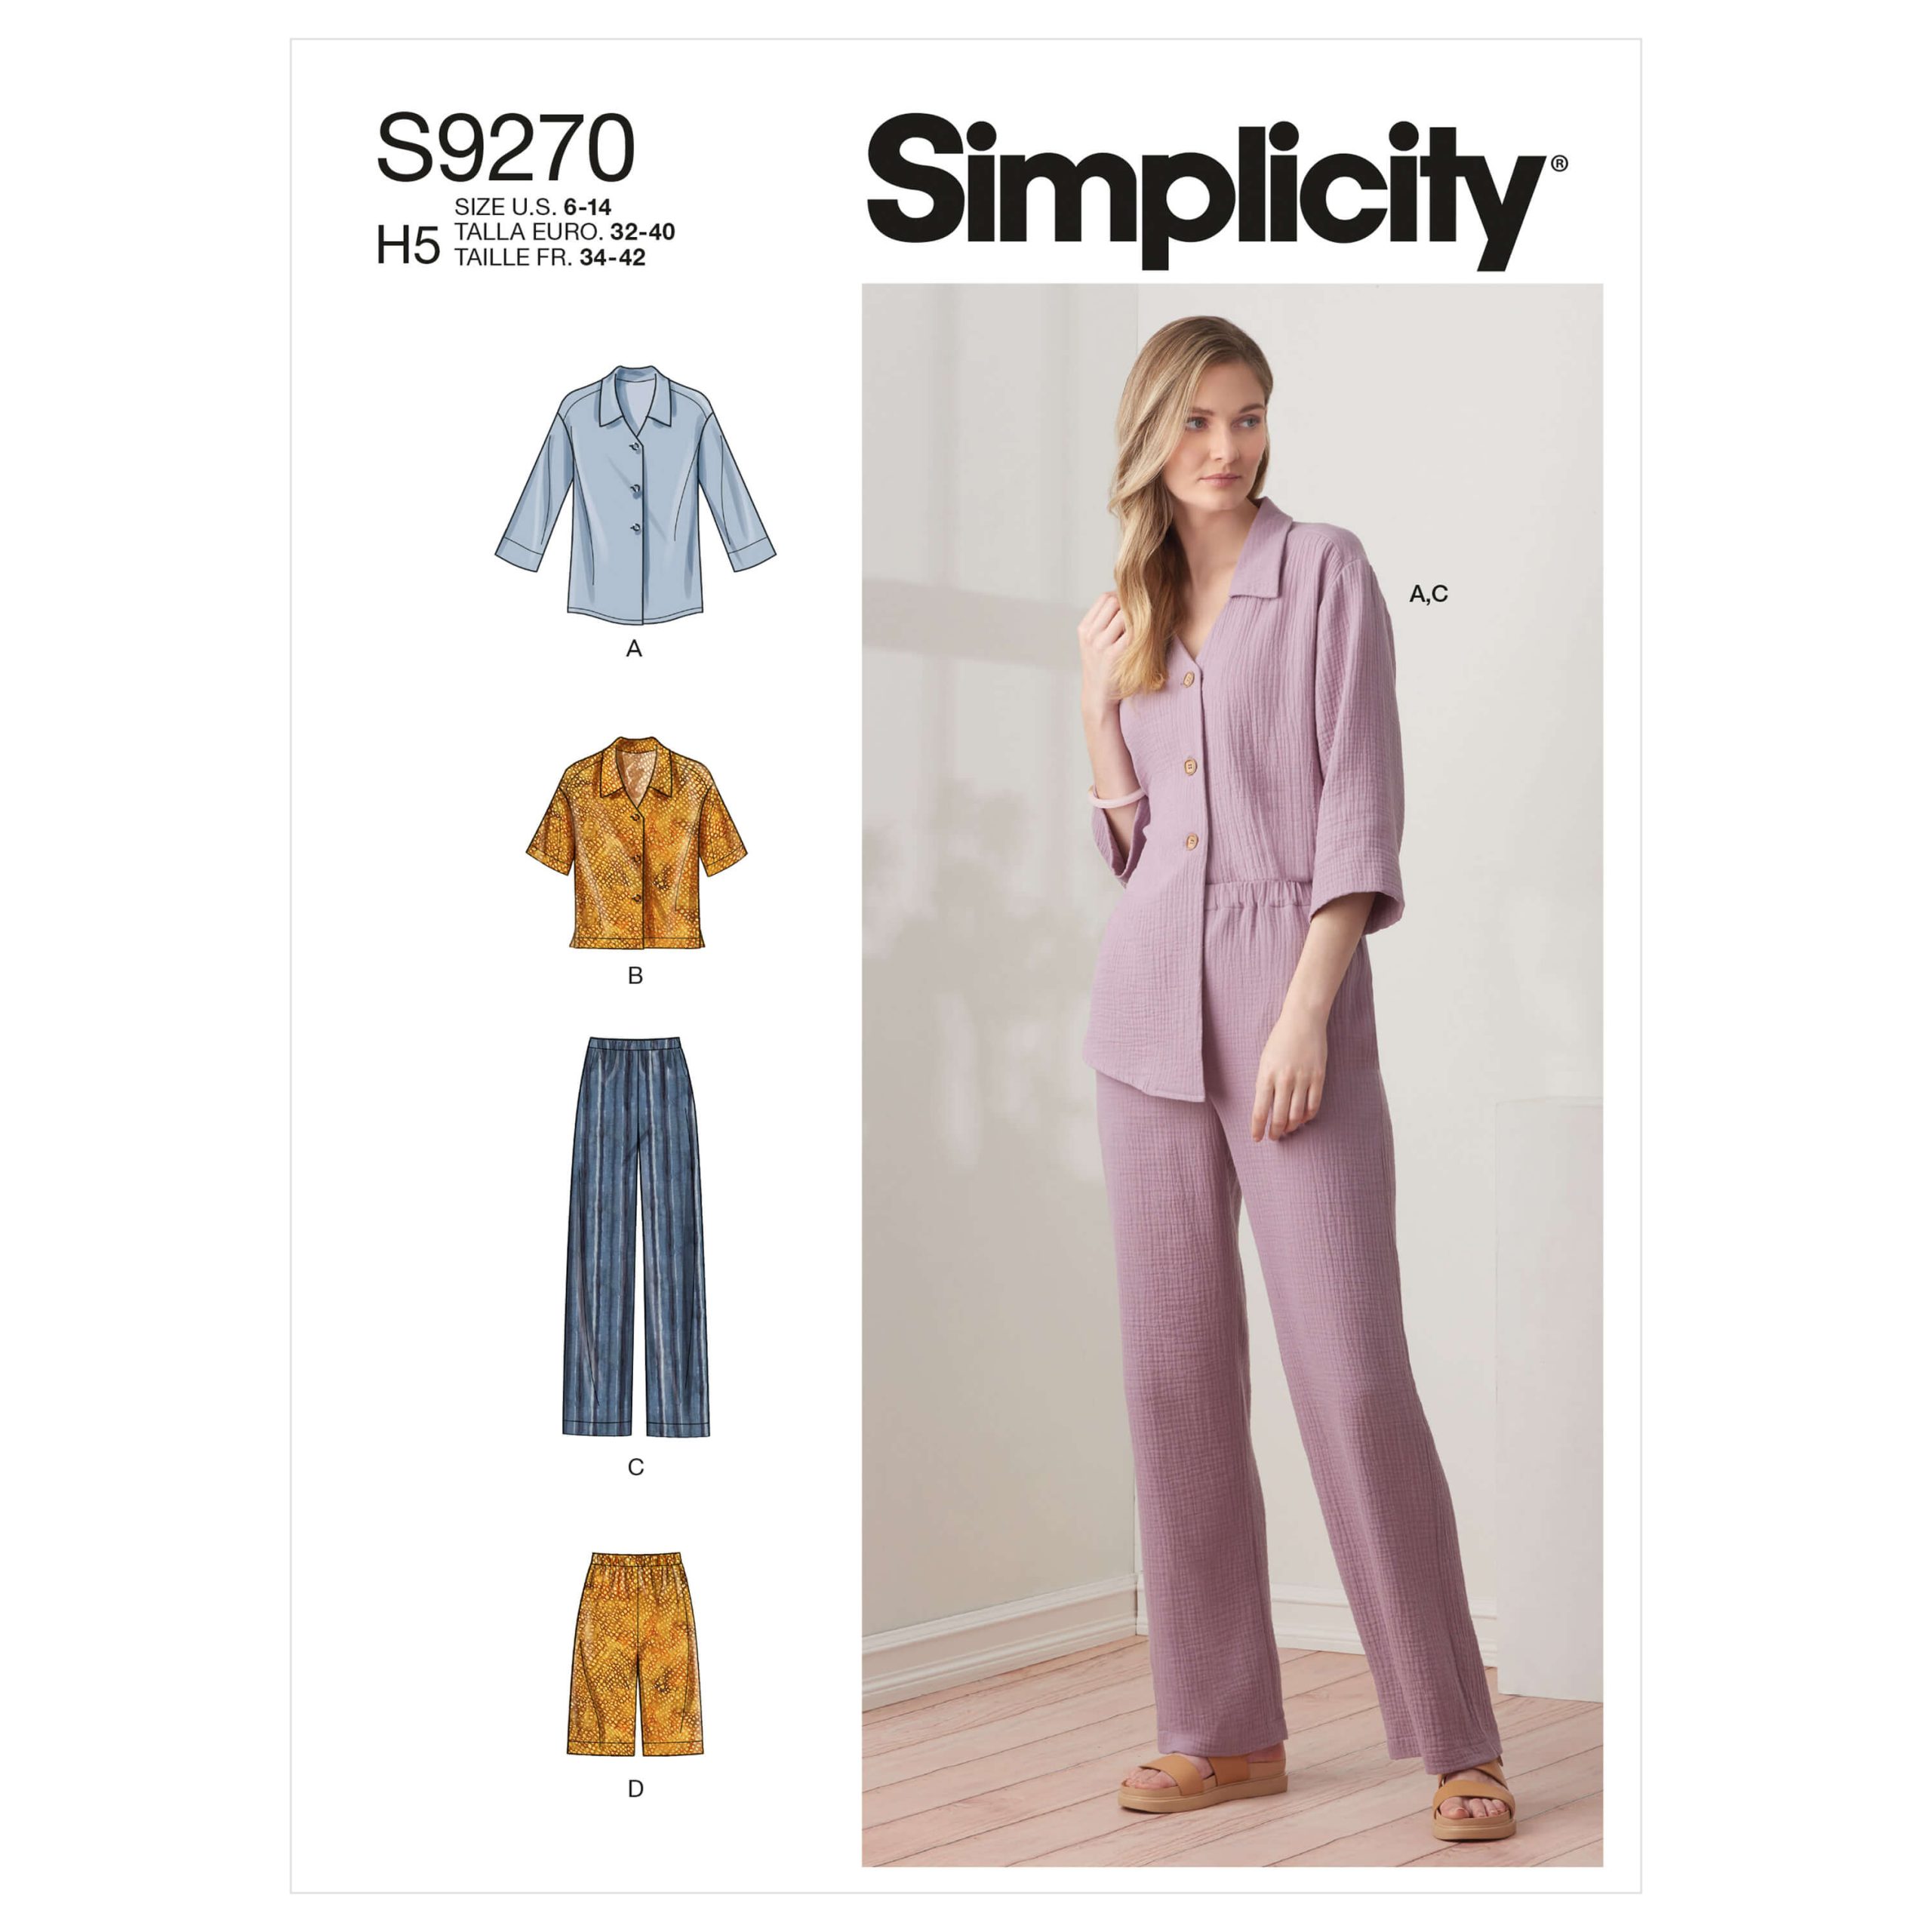 Simplicity Sewing Pattern S9270 Misses' Tops and Trousers